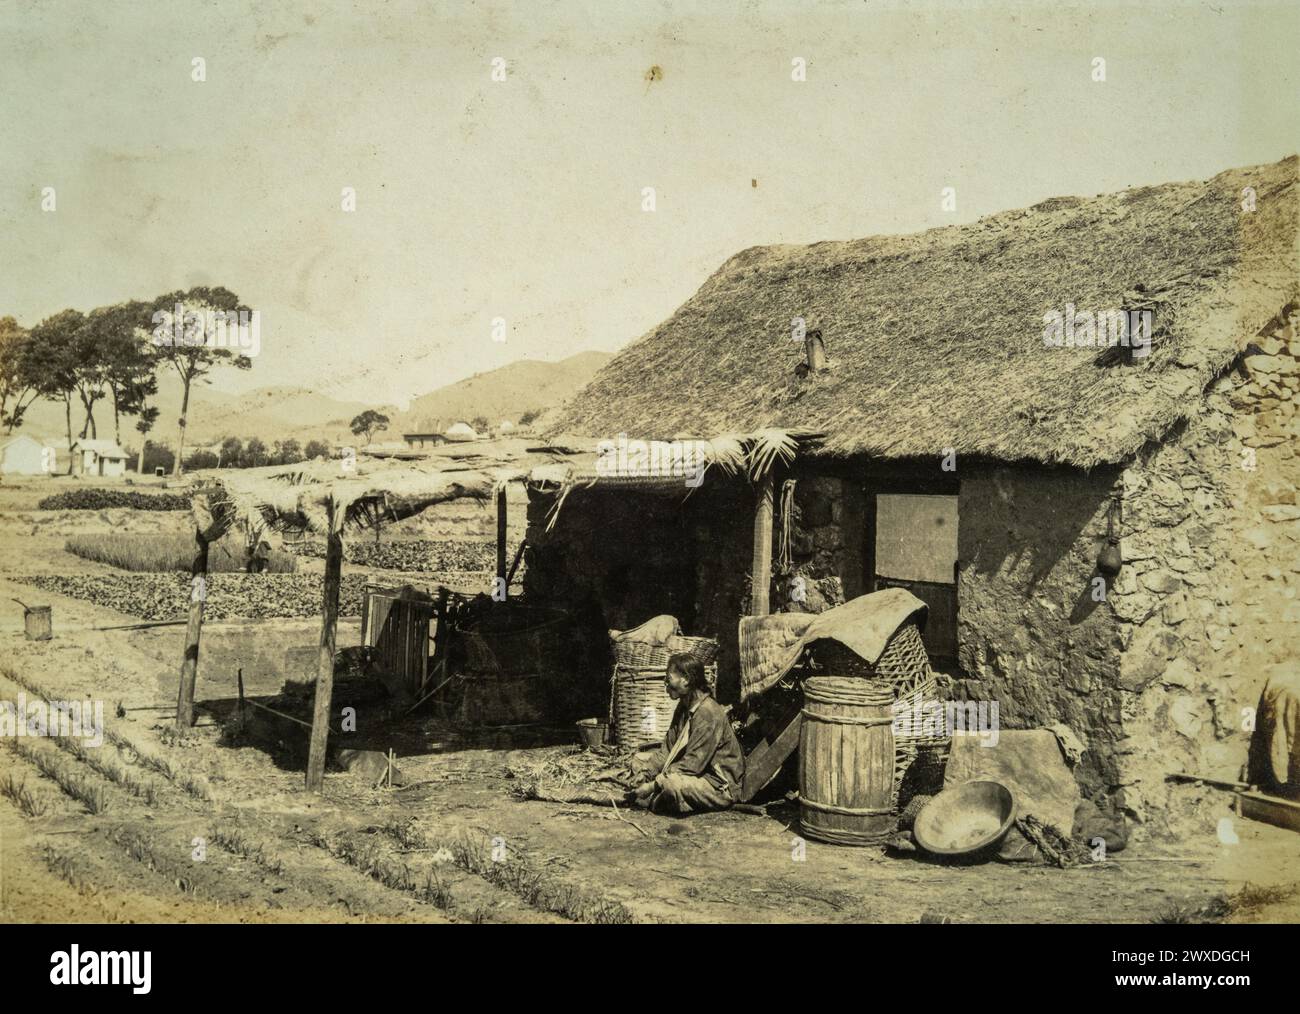 Historic photograph of a farmer's thatched house and fields in Northeast China (Manchuria) in the 1930s and 1940s. Stock Photo